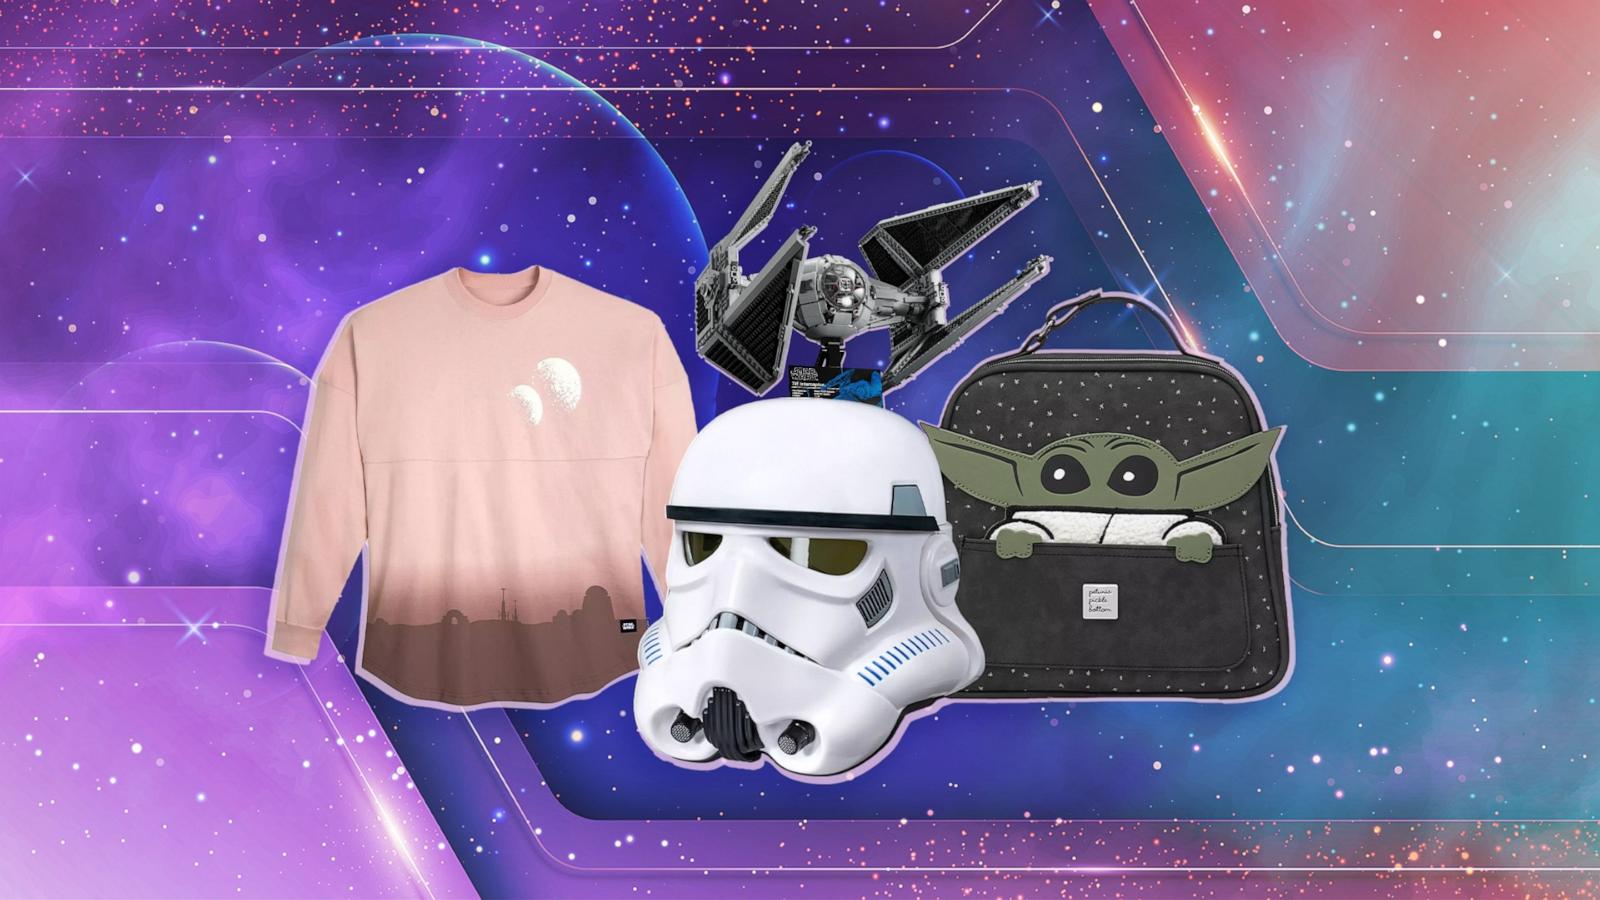 Shop Star Wars gifts for every budget and age group